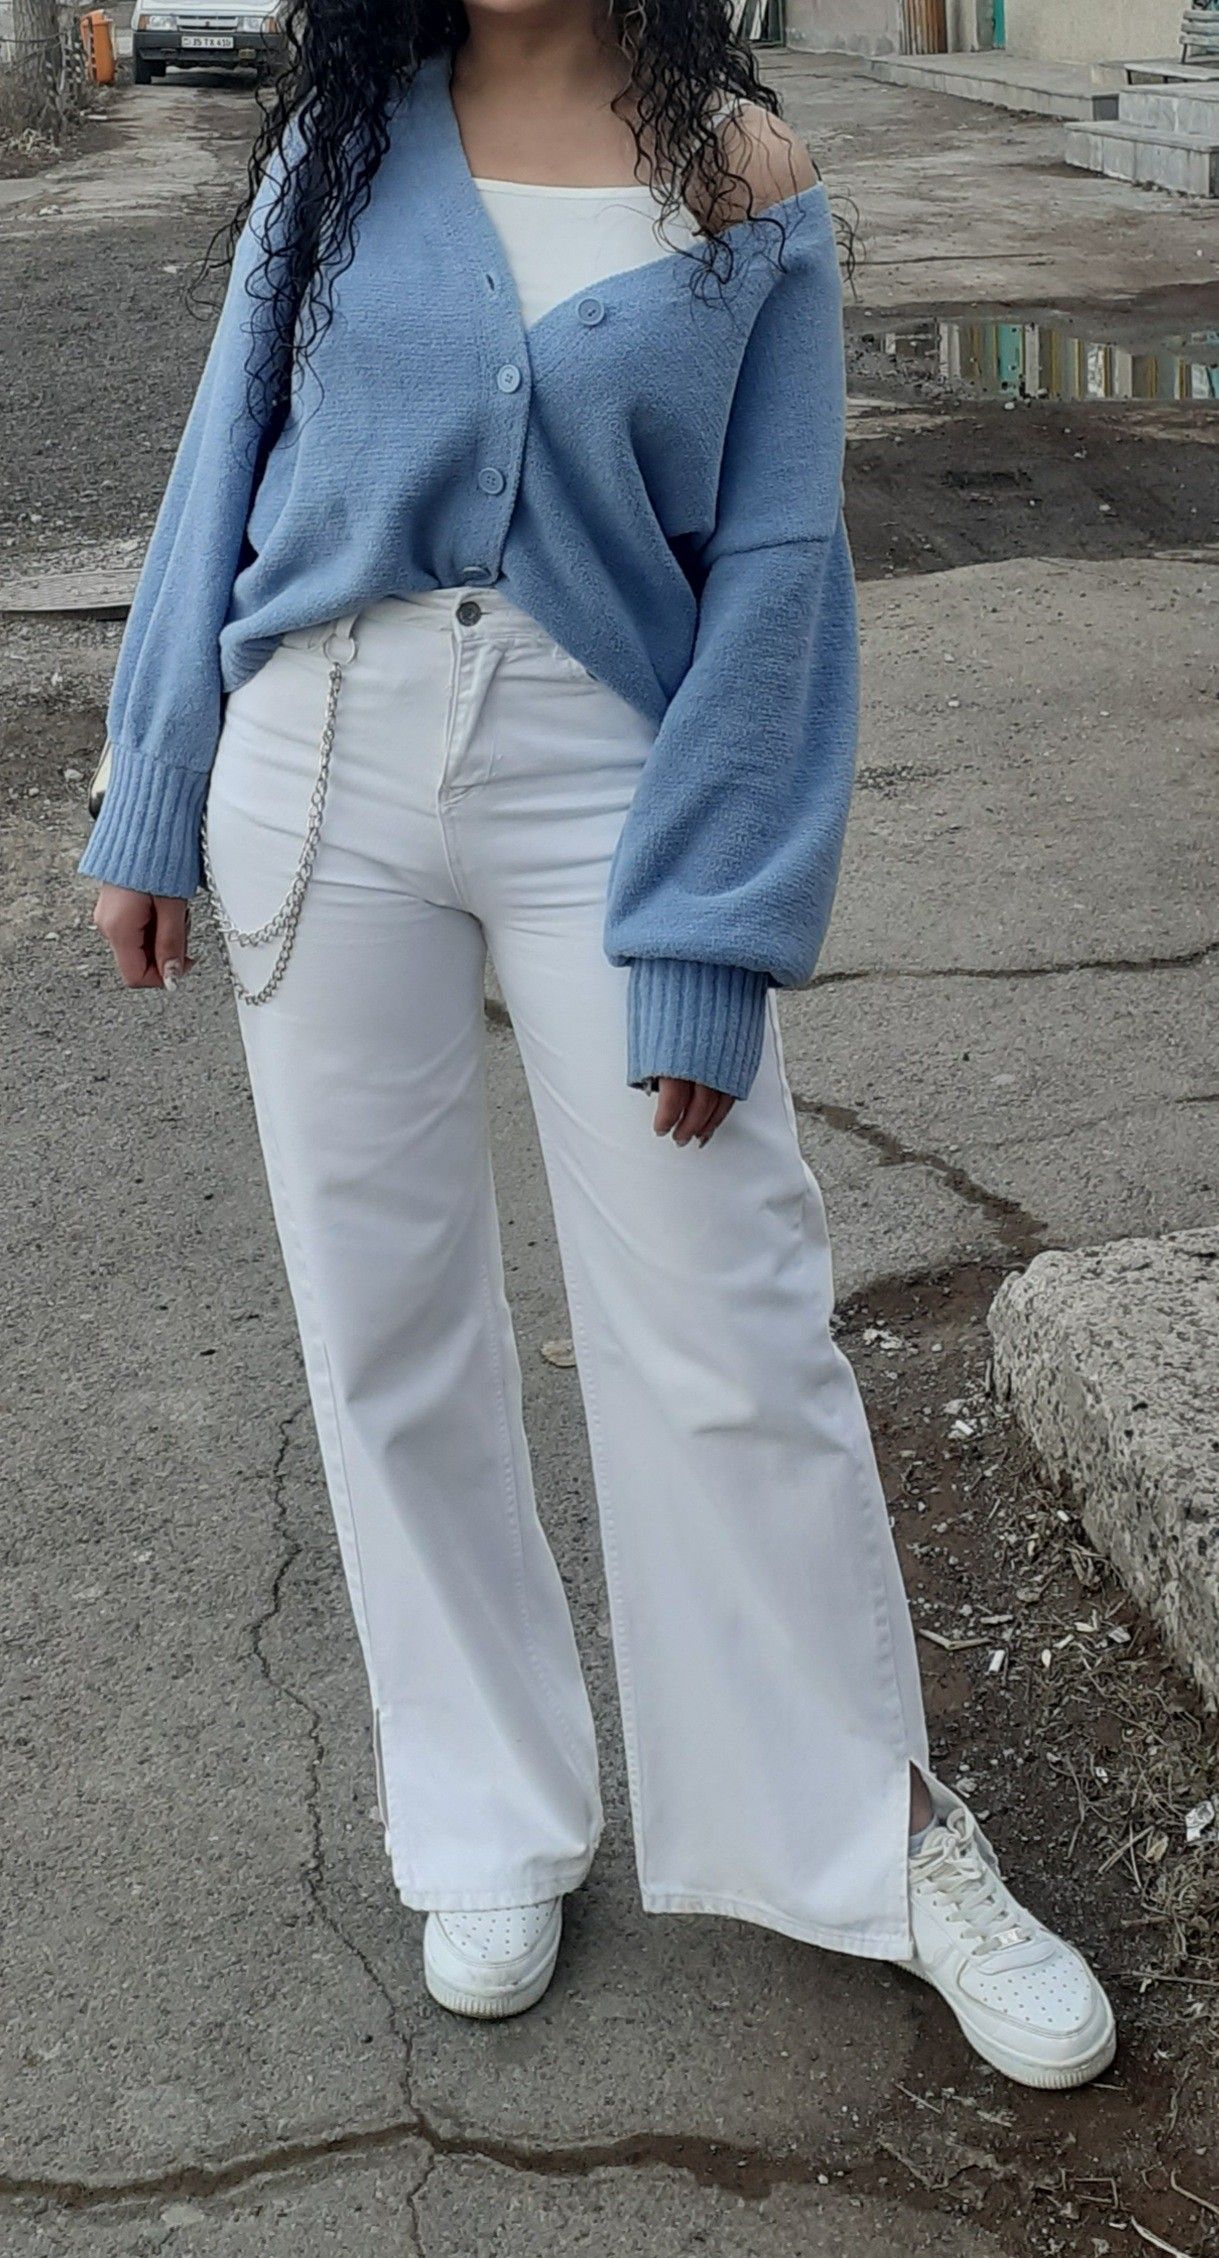 How to style white high waisted jeans for
any occasion